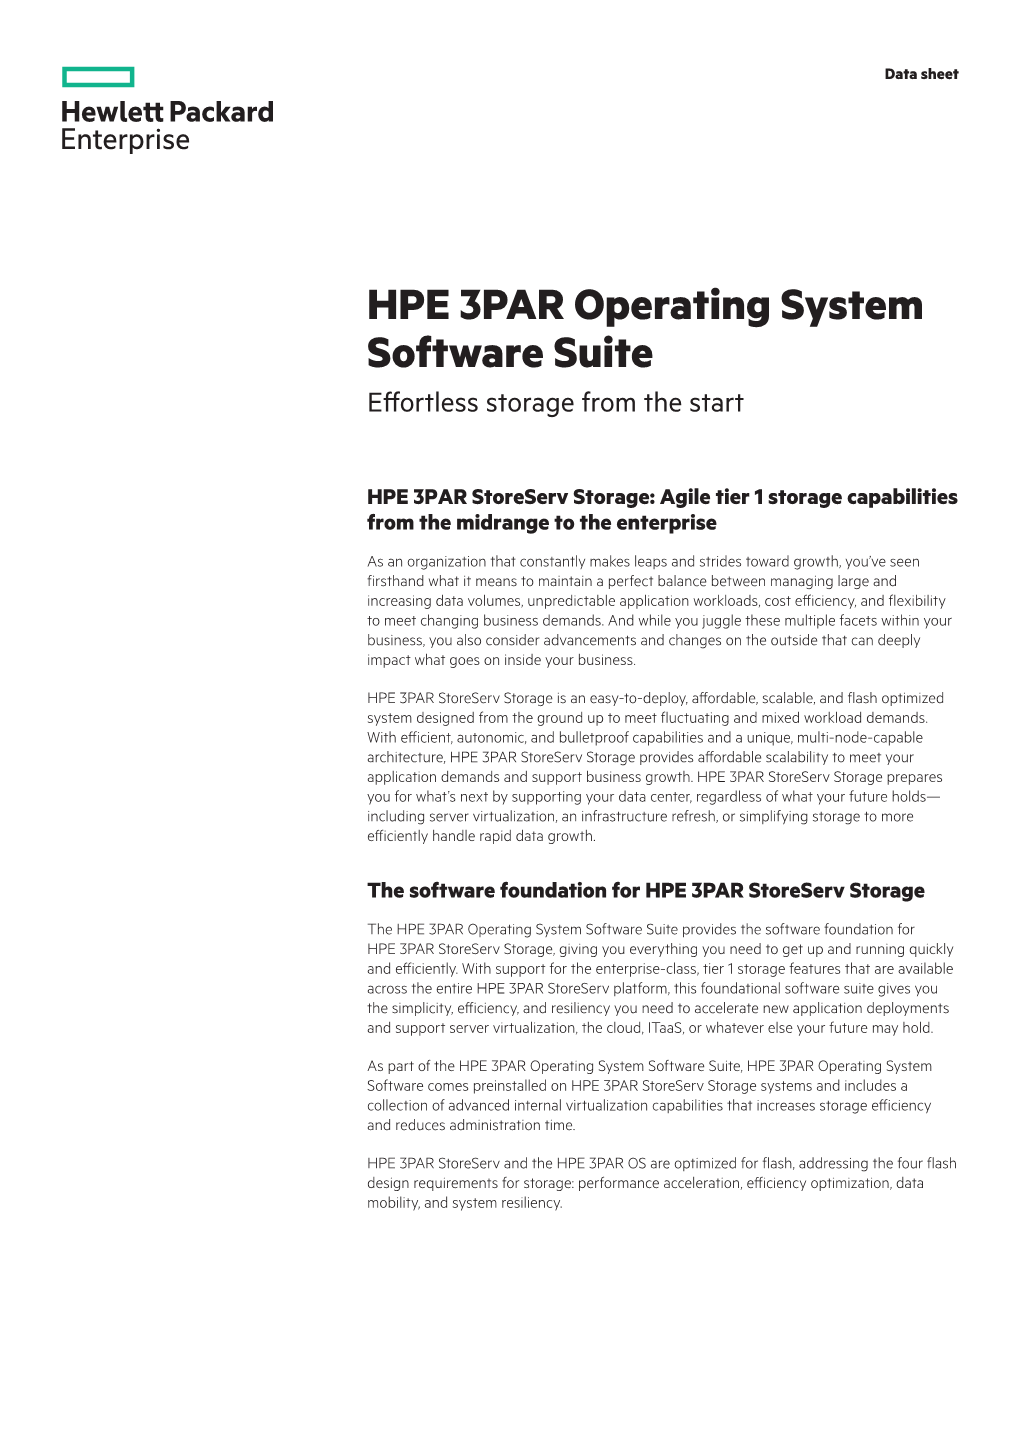 HPE 3PAR Operating System Software Suite Effortless Storage from the Start